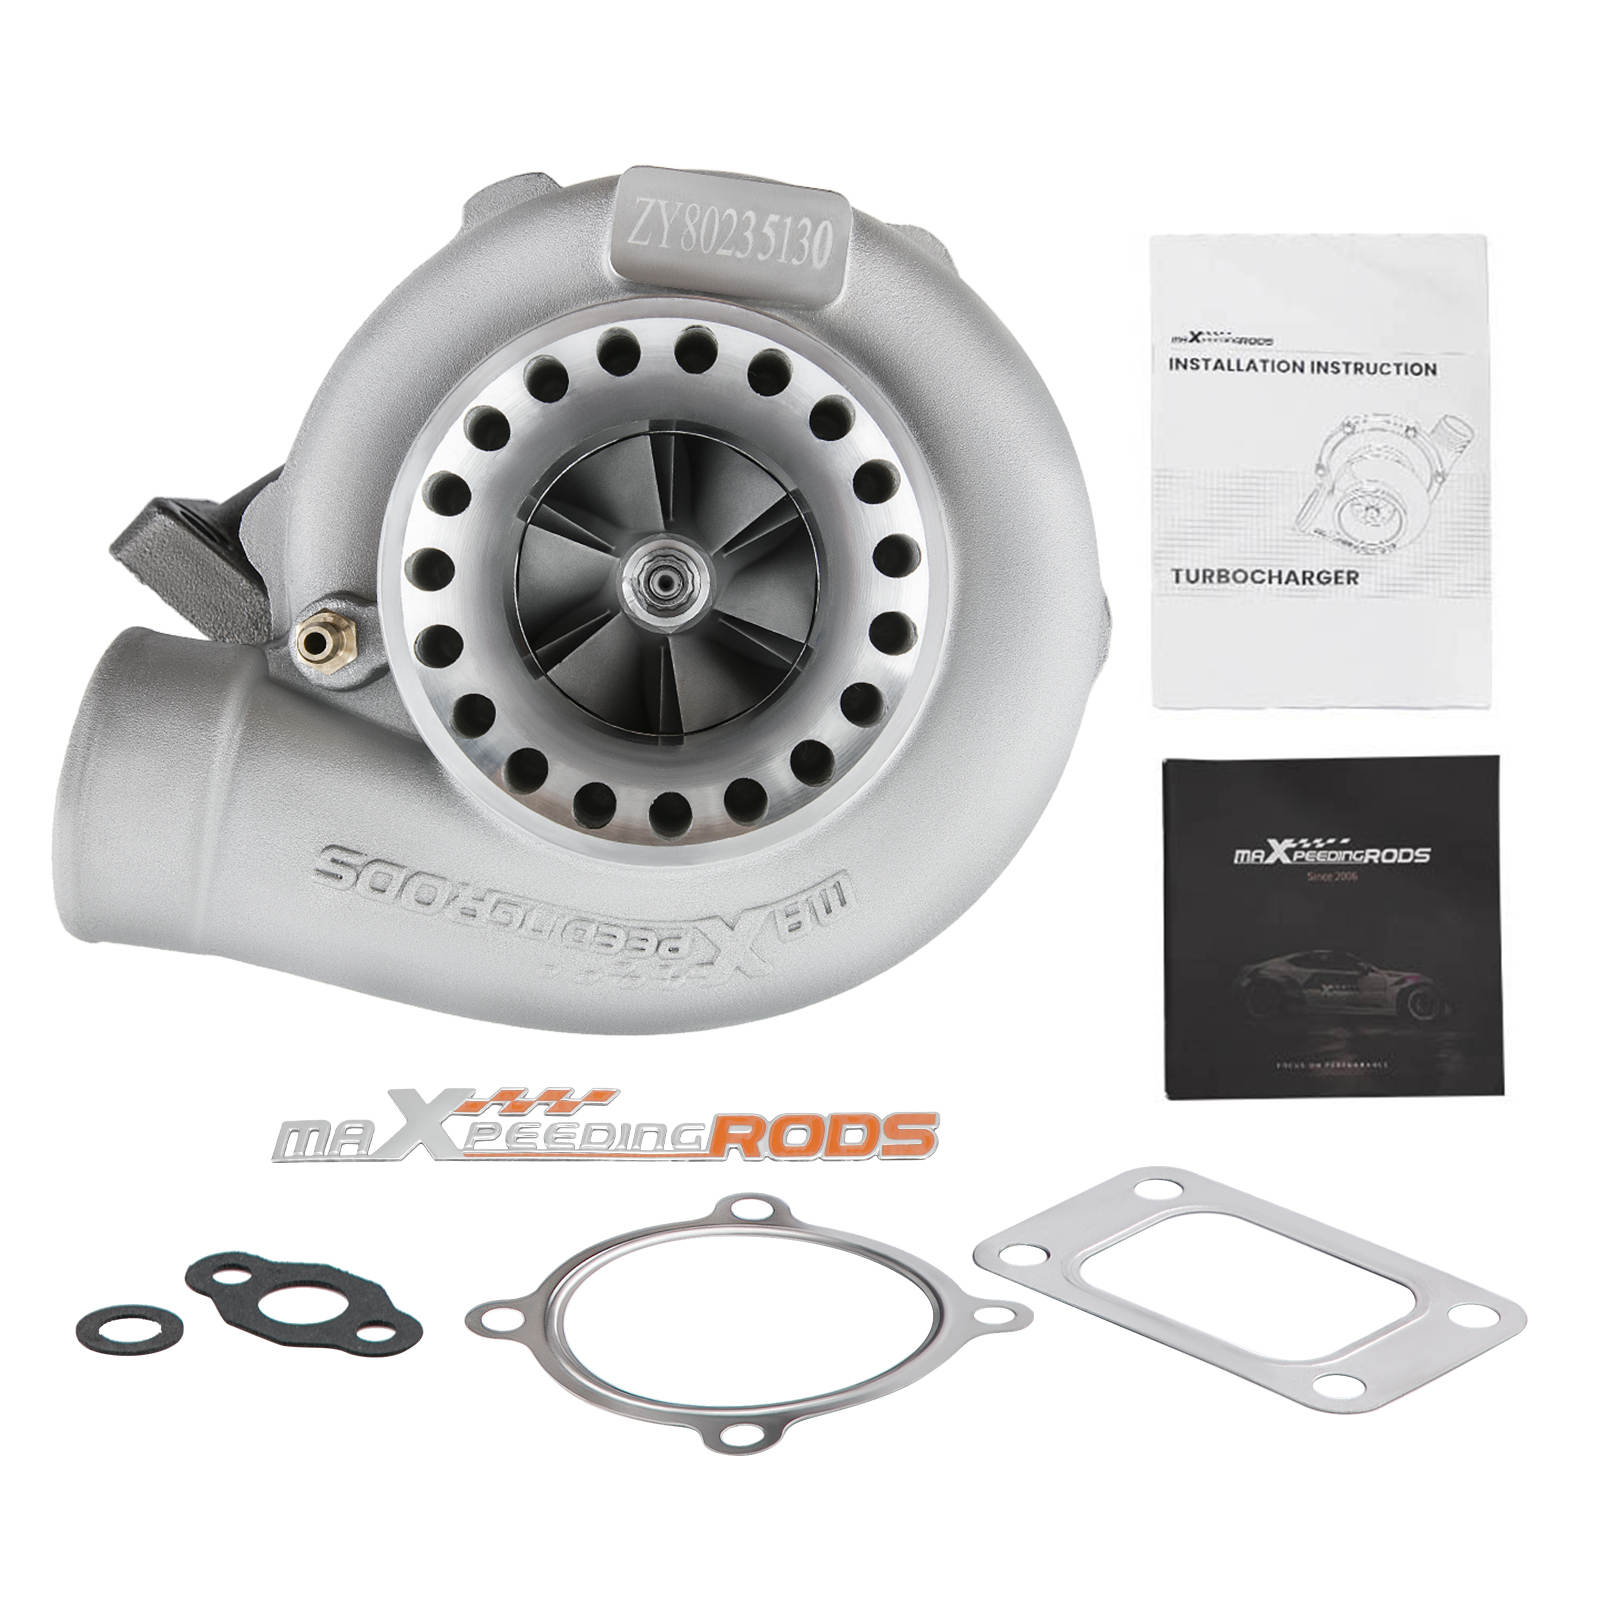  JDMSPEED New Universal Turbo Turbocharger Turbolader For GT3582  T3 Flange 4 Bolts A/R.7 400-600HP : Automotive